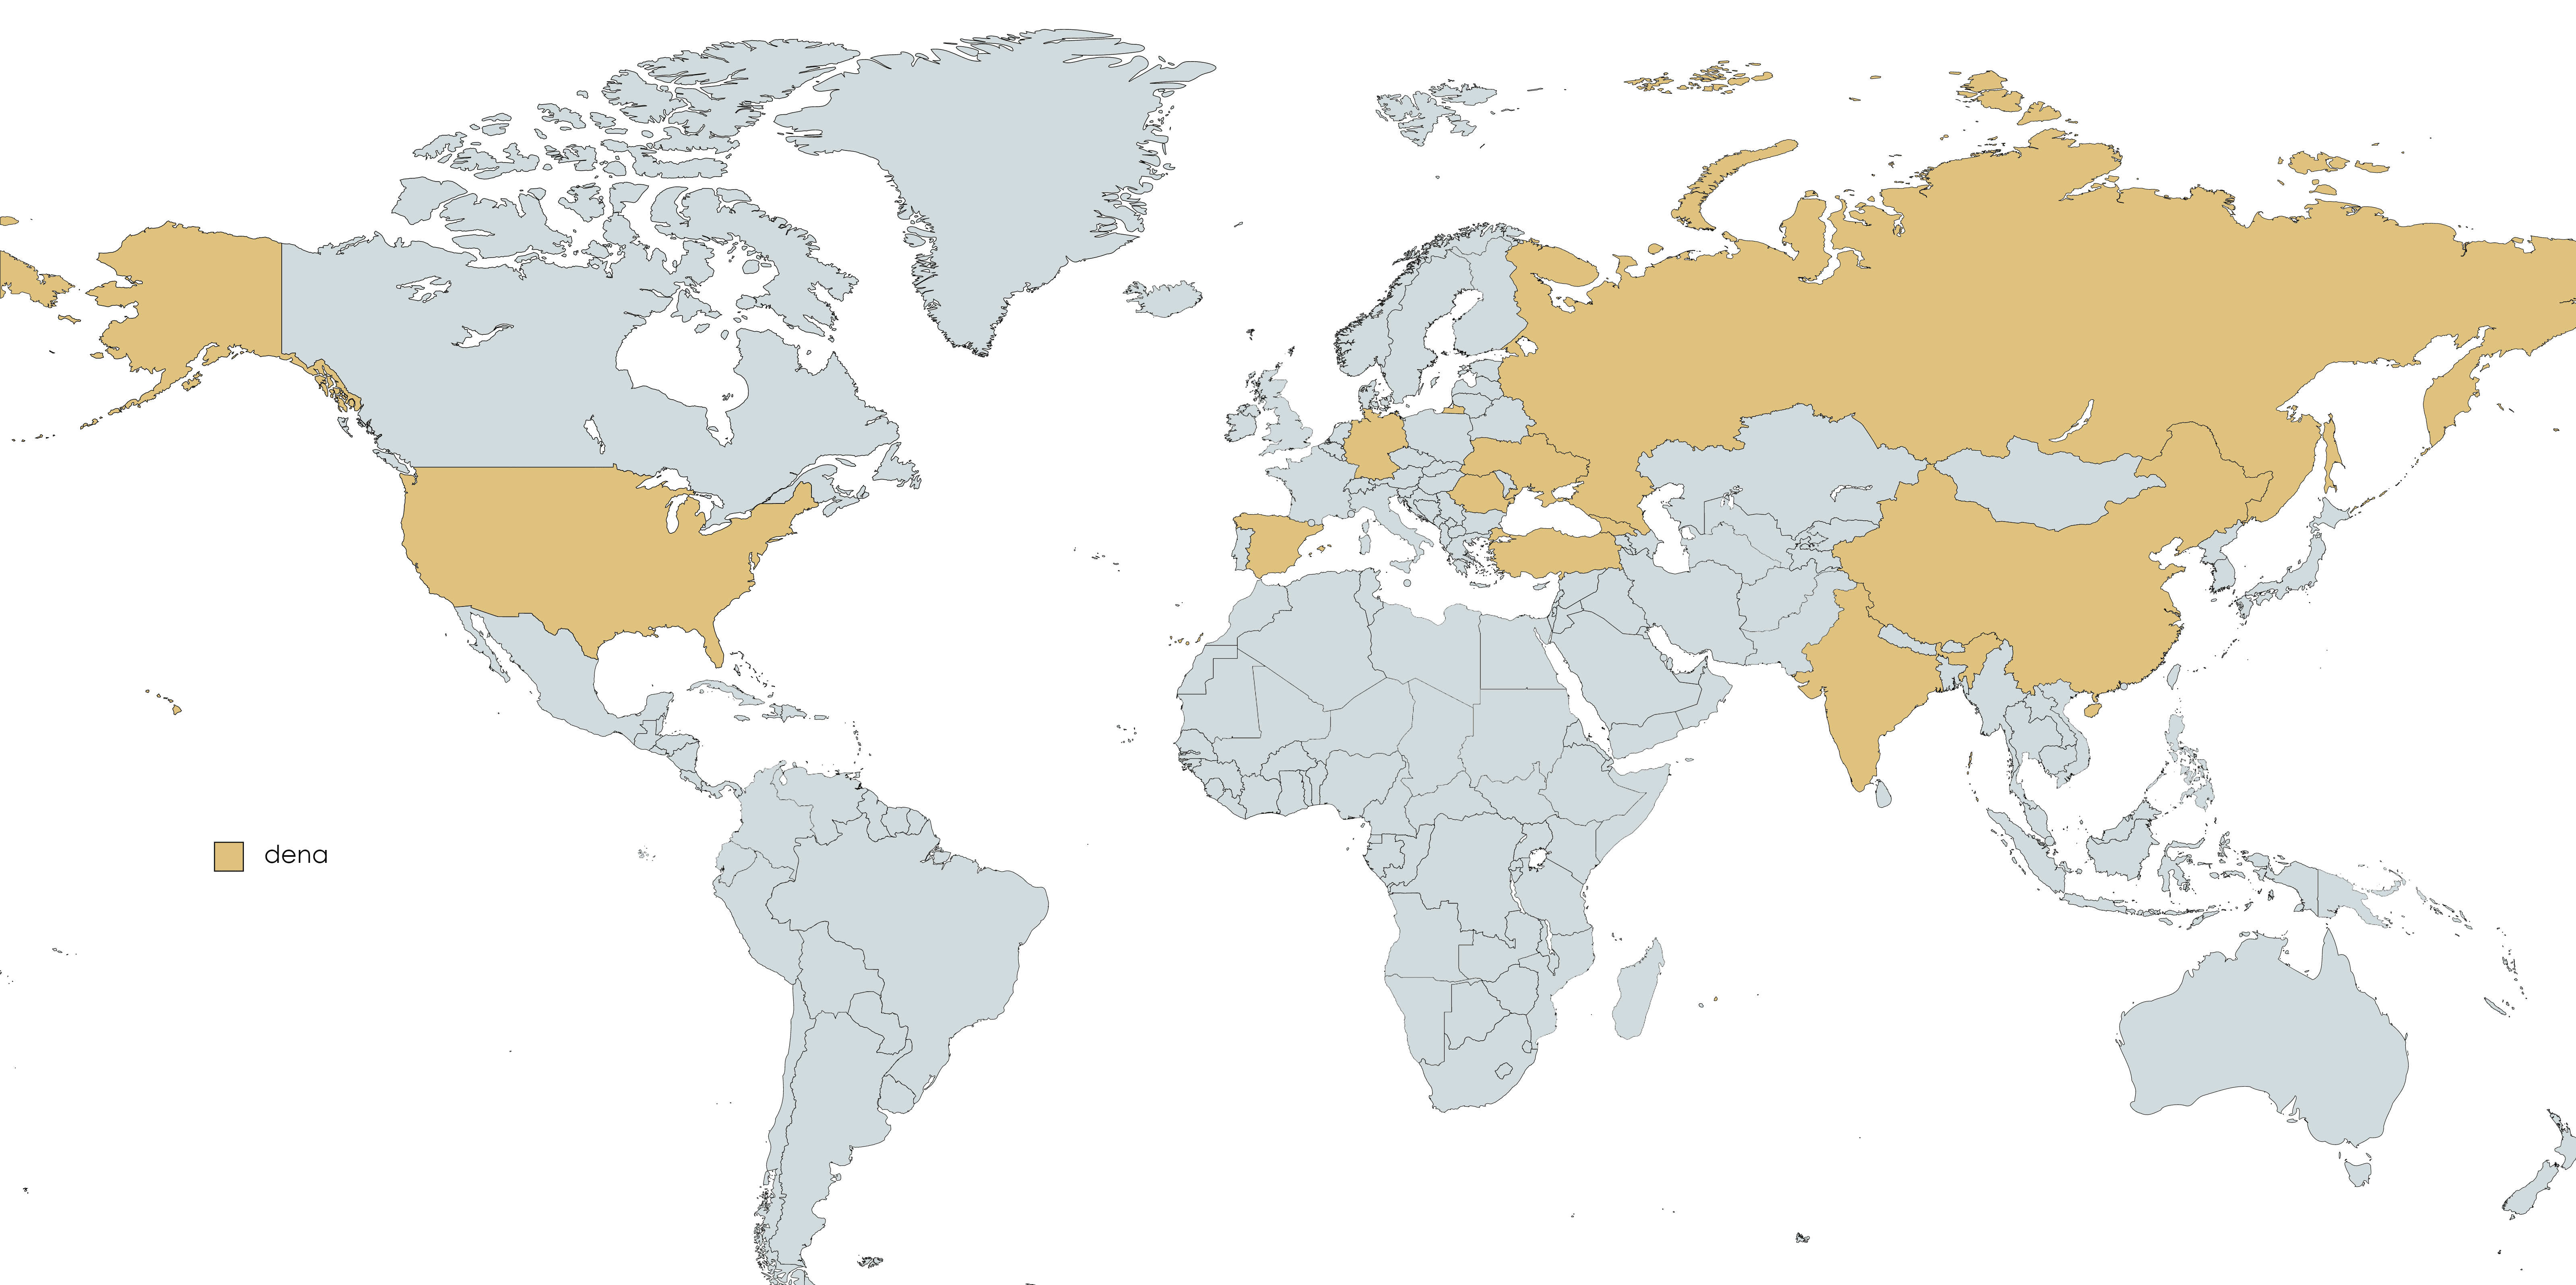 Map of the world with highlighted sections showing mentor countries